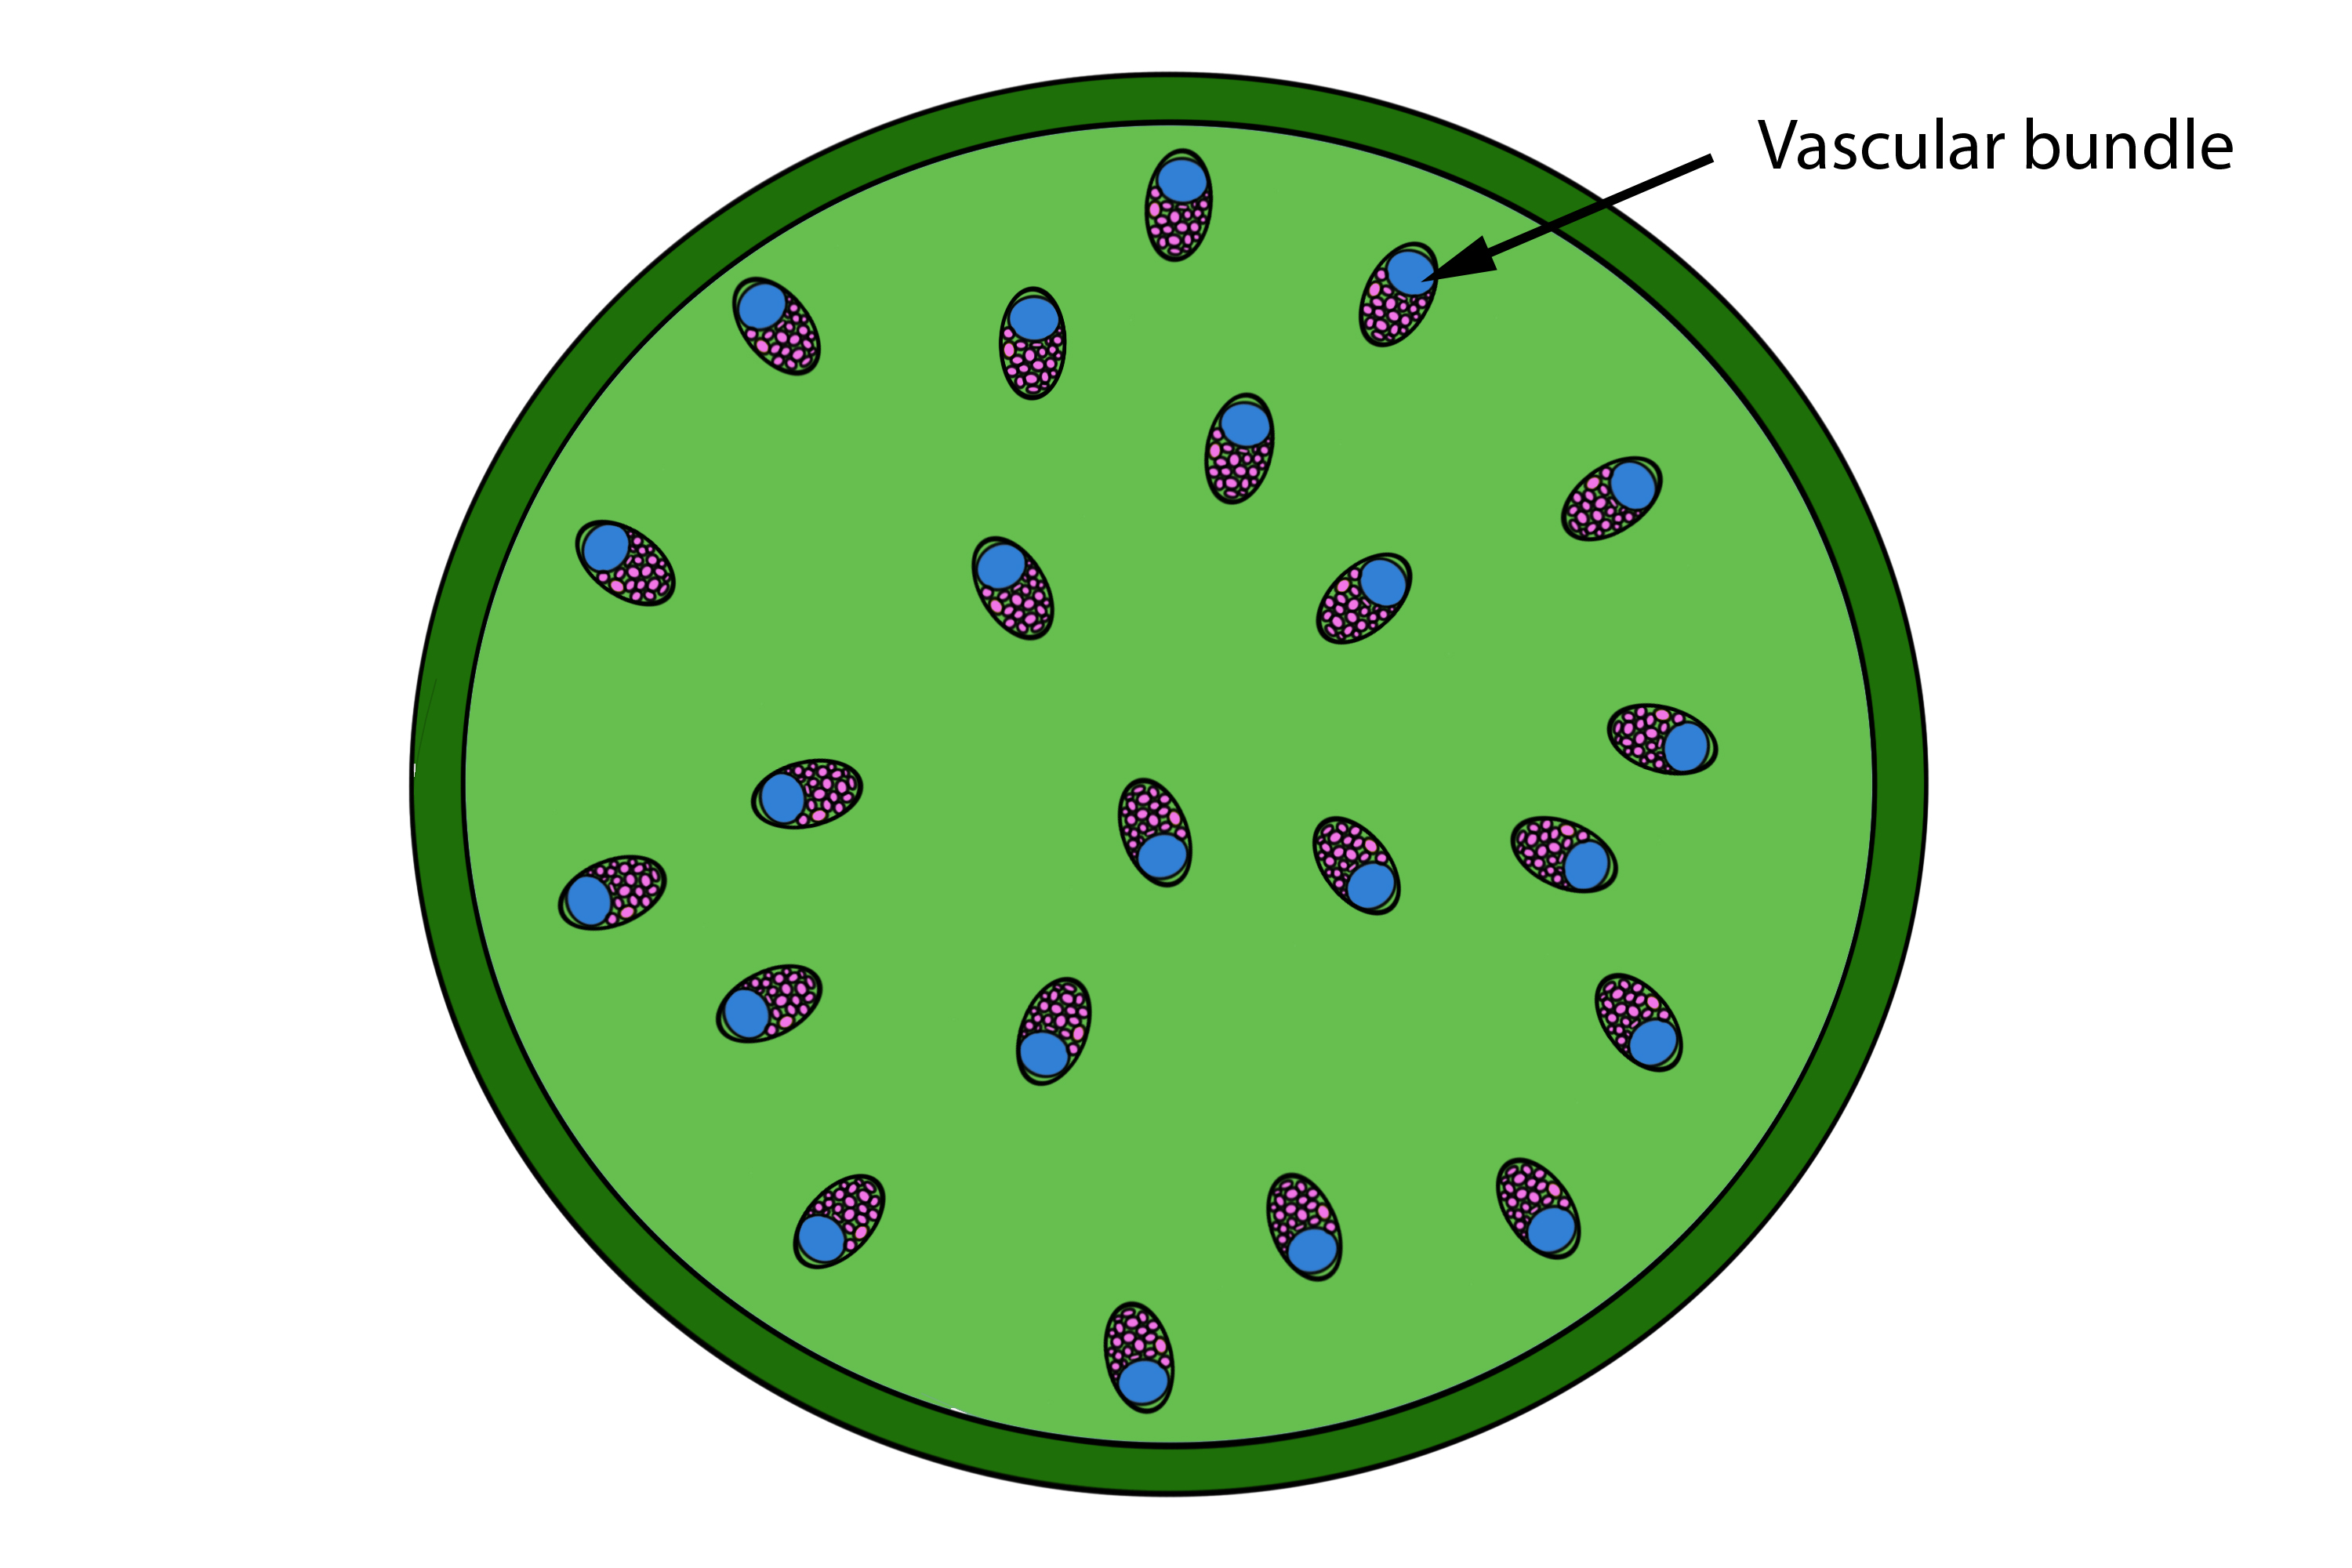 Cross section of a monocot stem showing the scattered vascular bundles